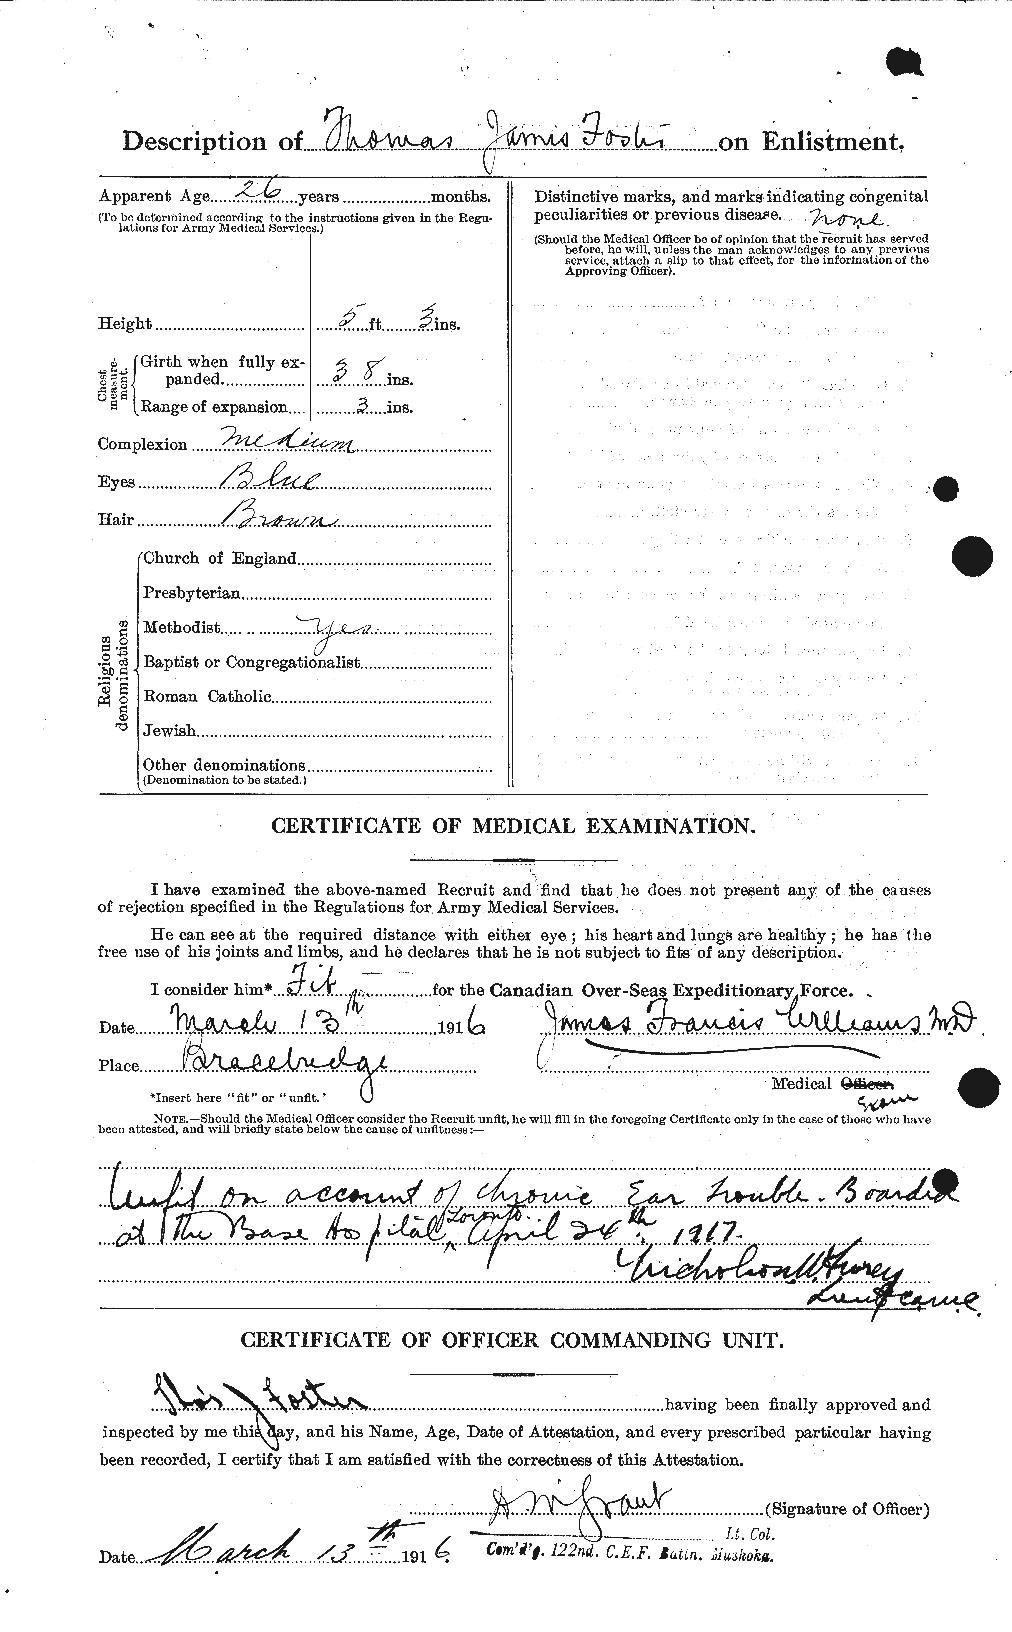 Personnel Records of the First World War - CEF 335241b